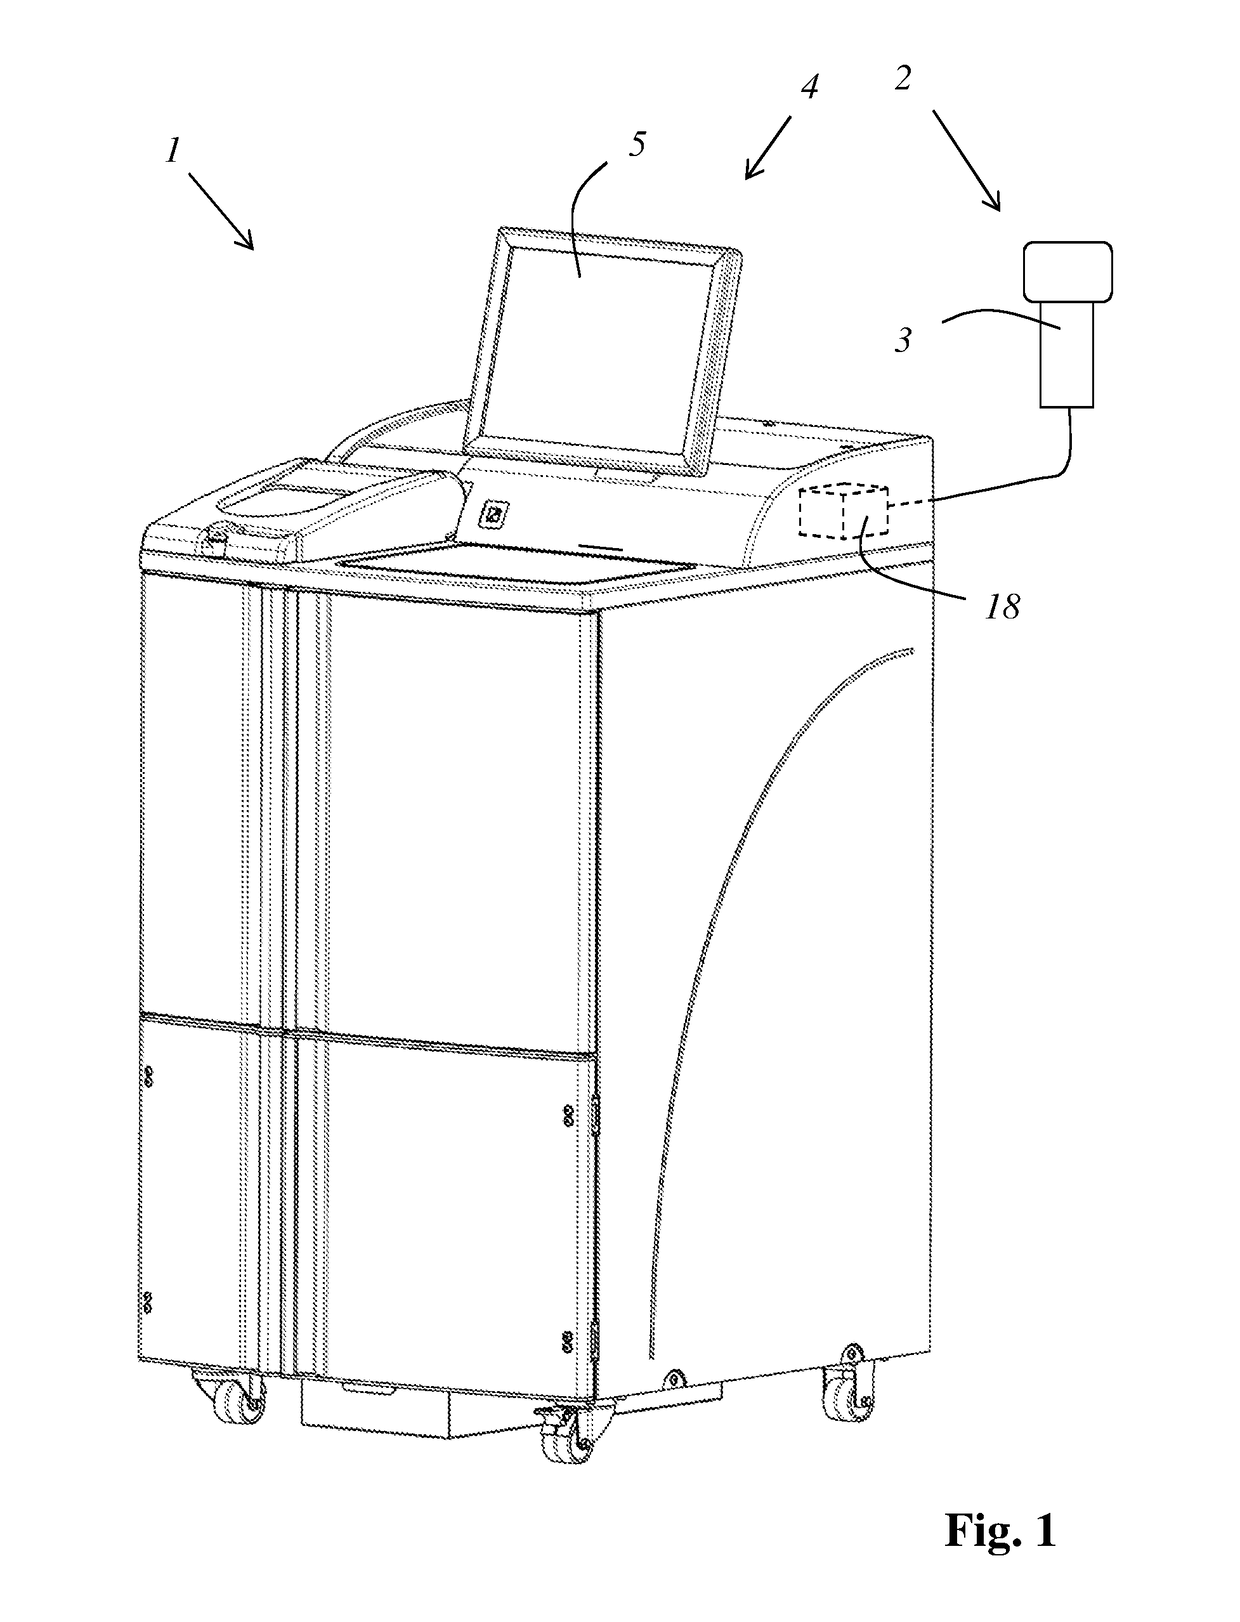 Treatment device for treating histological or cytological samples